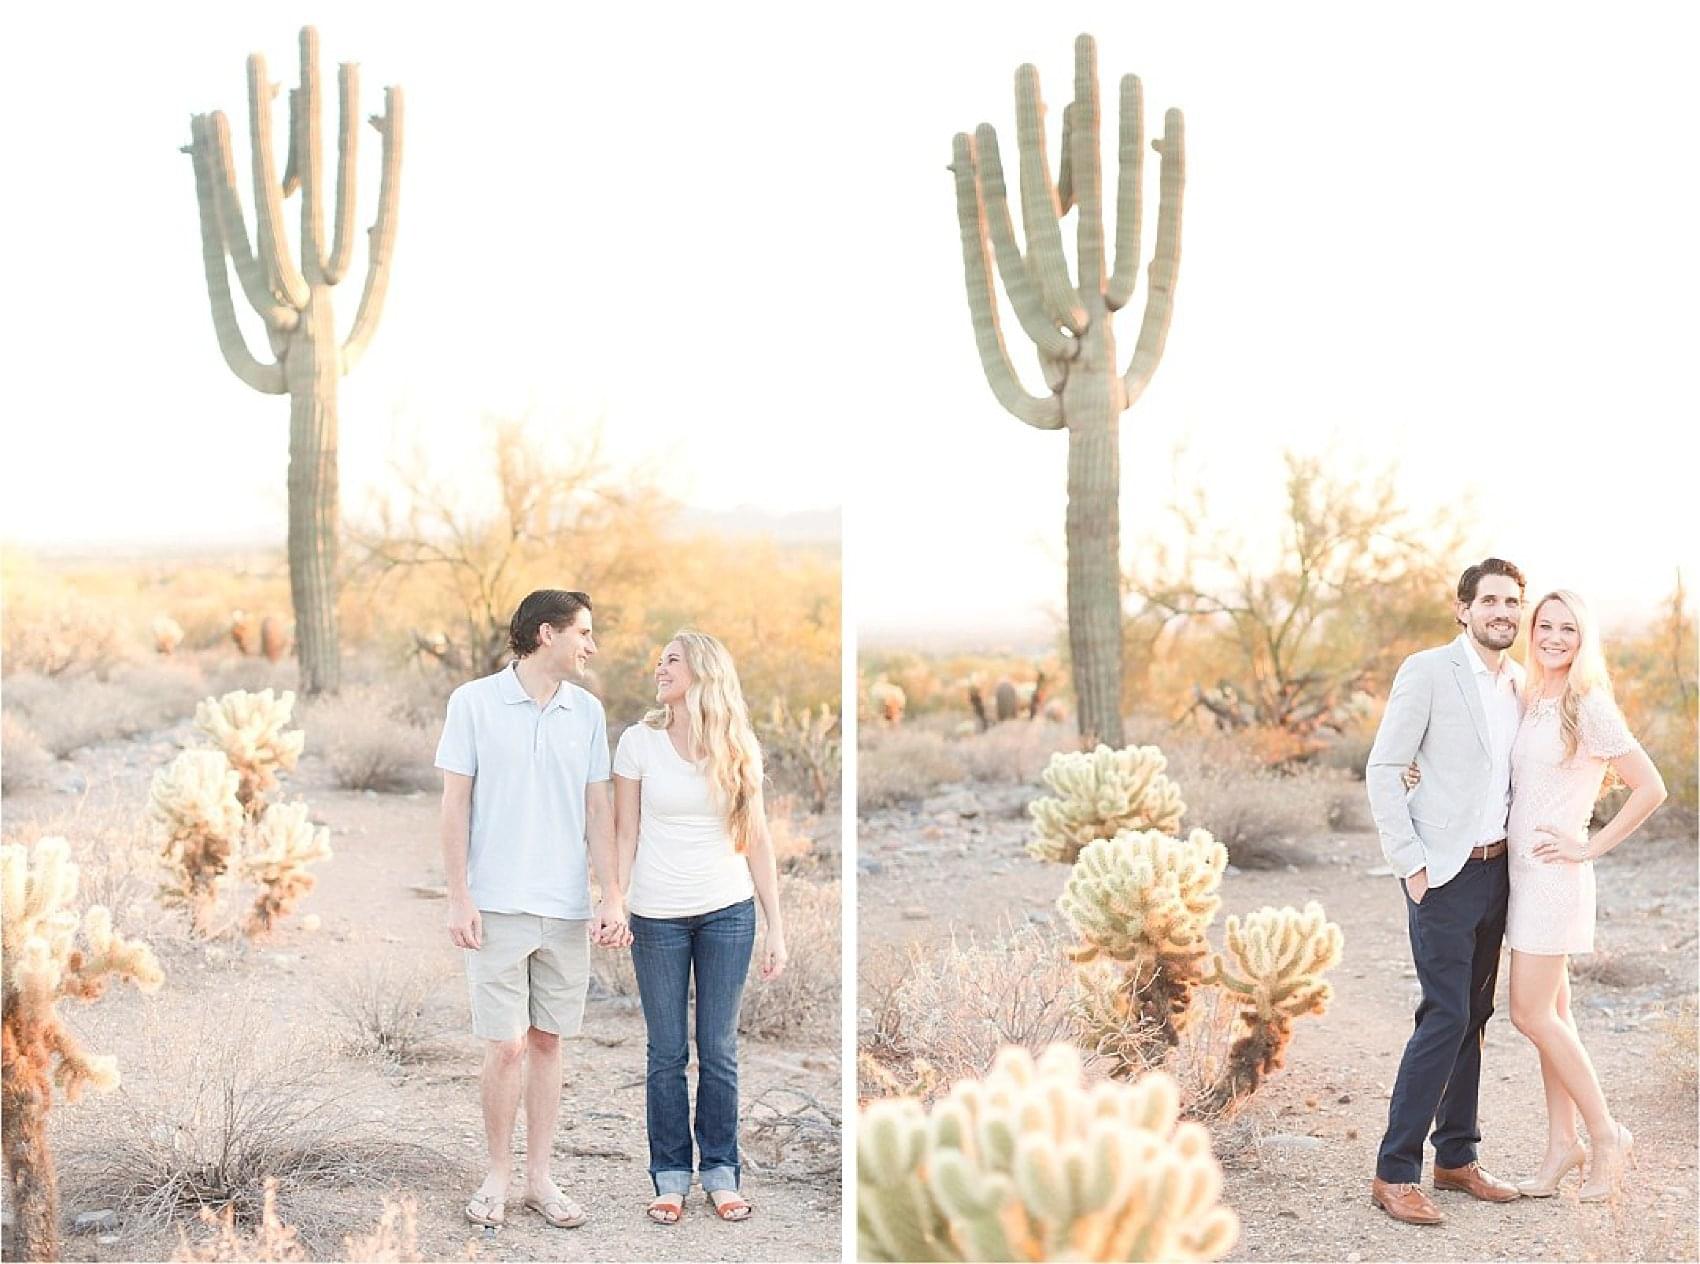 Engagement Session Style Guide